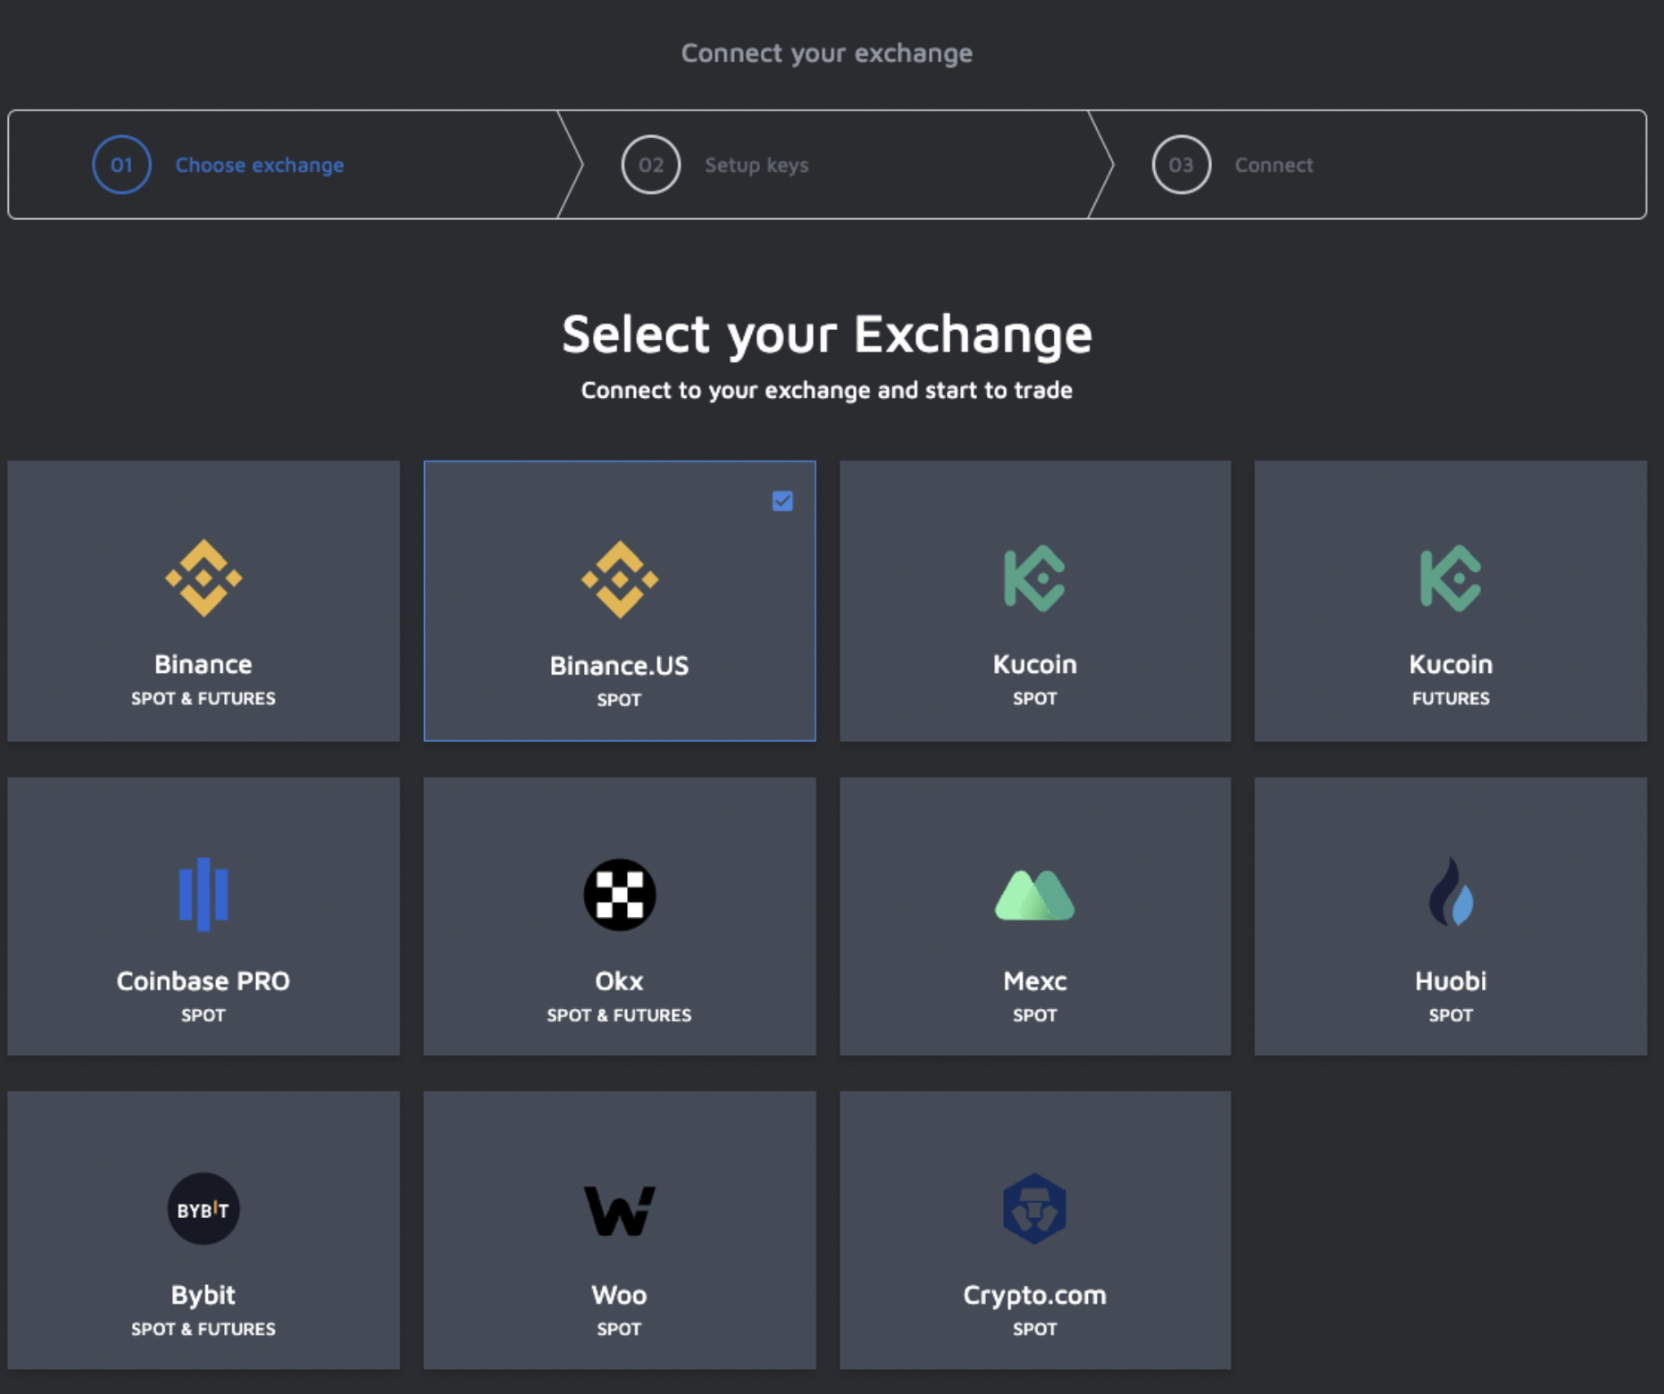 Connect Binance.US to Mizar. This image is a black background and contains logos of crypto exchanges such as Binance, Binance.US, KuCoin, Coinbase PRO, OKX, MEXC, Huobi, ByBit, Woo and Crypto.com. 